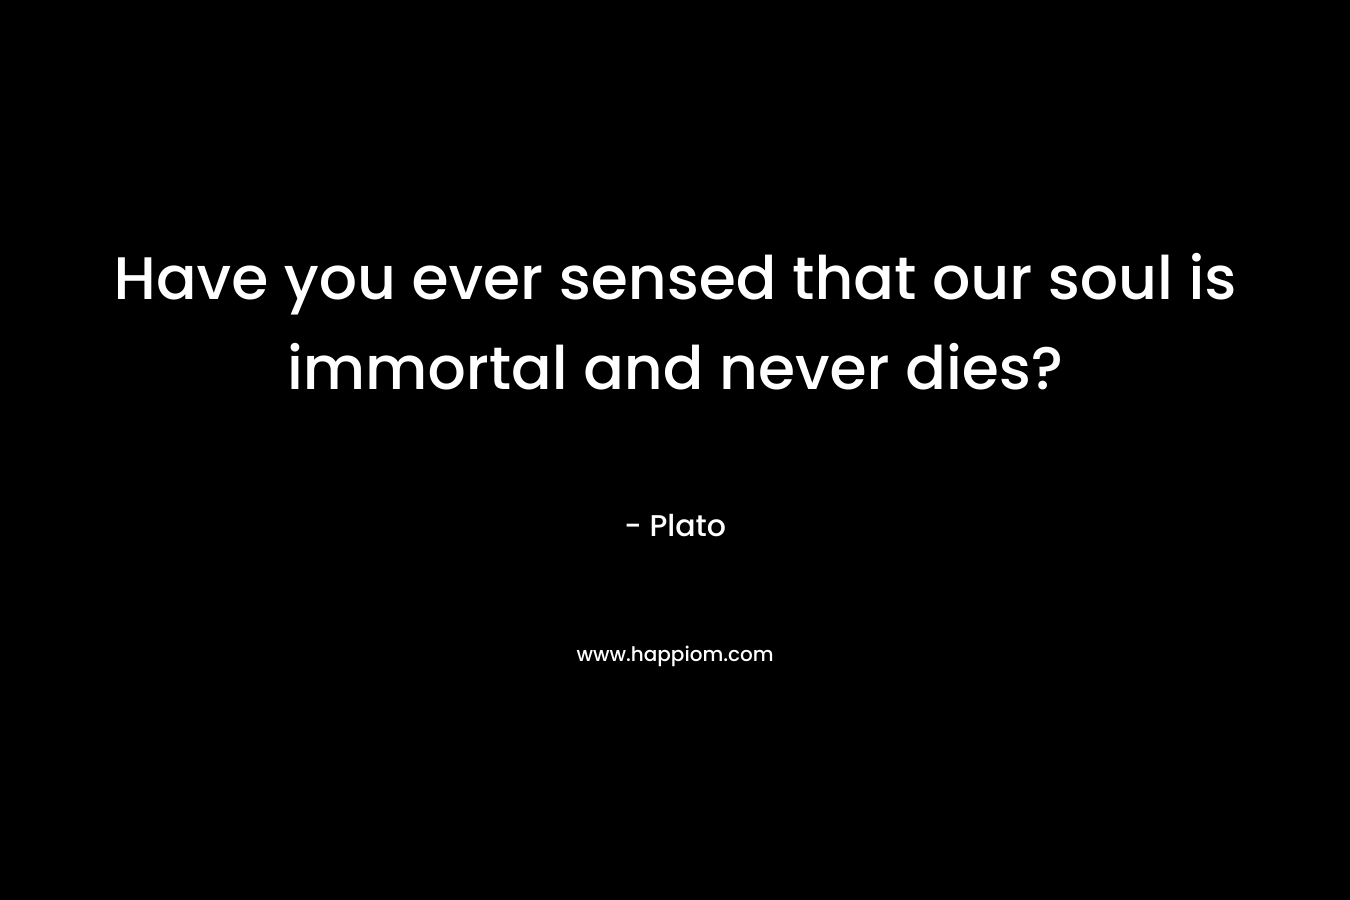 Have you ever sensed that our soul is immortal and never dies? – Plato